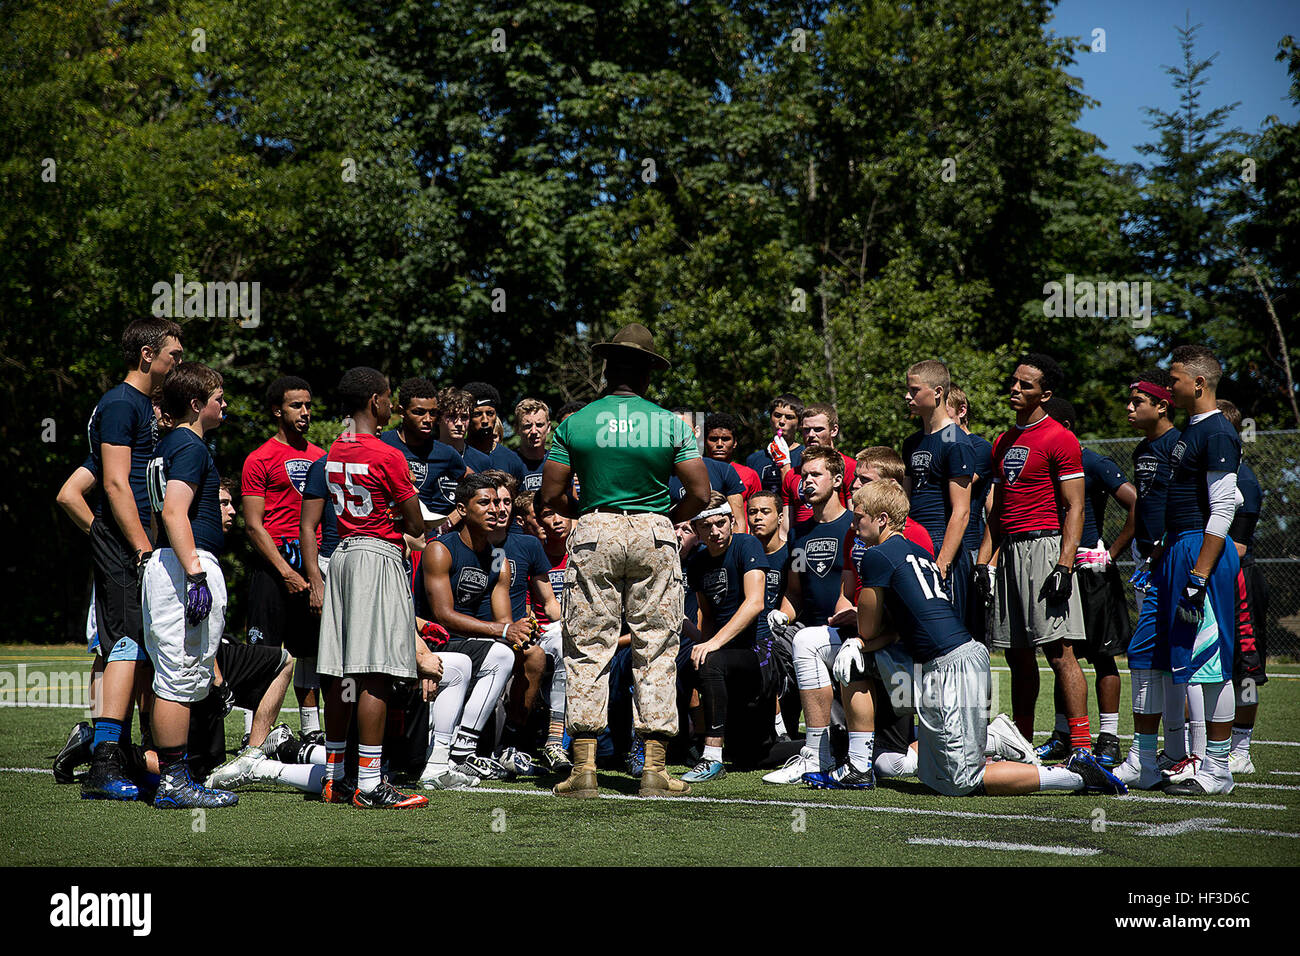 Sgt. Anthony Williams, a drill instructor assigned to Marine Corps Recruit Depot San Diego, speaks to high school football players about the importance of communication during a Semper Fidelis All-American football camp at Hazen High School in Renton, Washington, June 14, 2015. More than 160 players from across Washington State experienced the one-day camp, led by former NFL coaches, local high school coaches and Marines. The camp, which focused on leadership and honor both on and off the field, leads up to the Semper Fidelis All-American Bowl game, which will be played in California in Januar Stock Photo